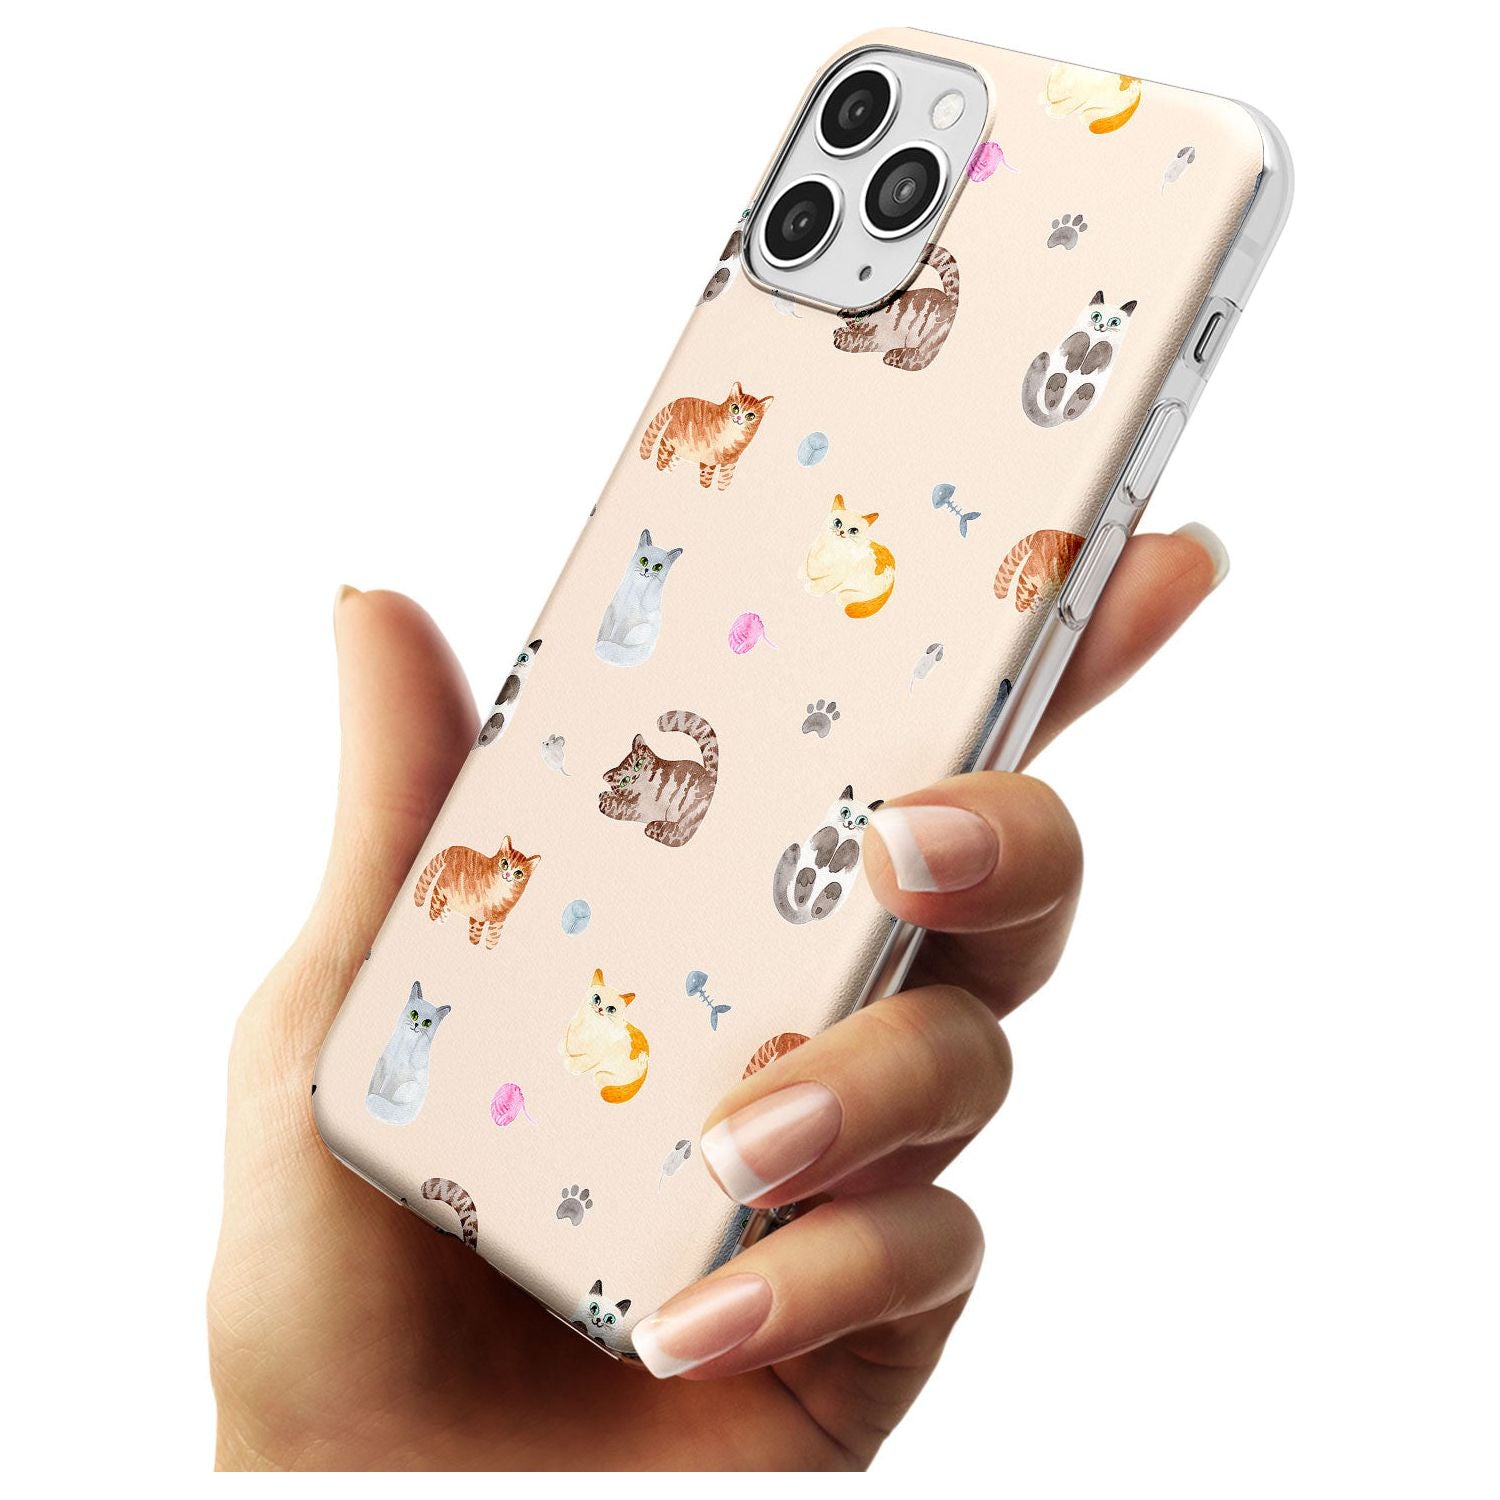 Cats with Toys Black Impact Phone Case for iPhone 11 Pro Max